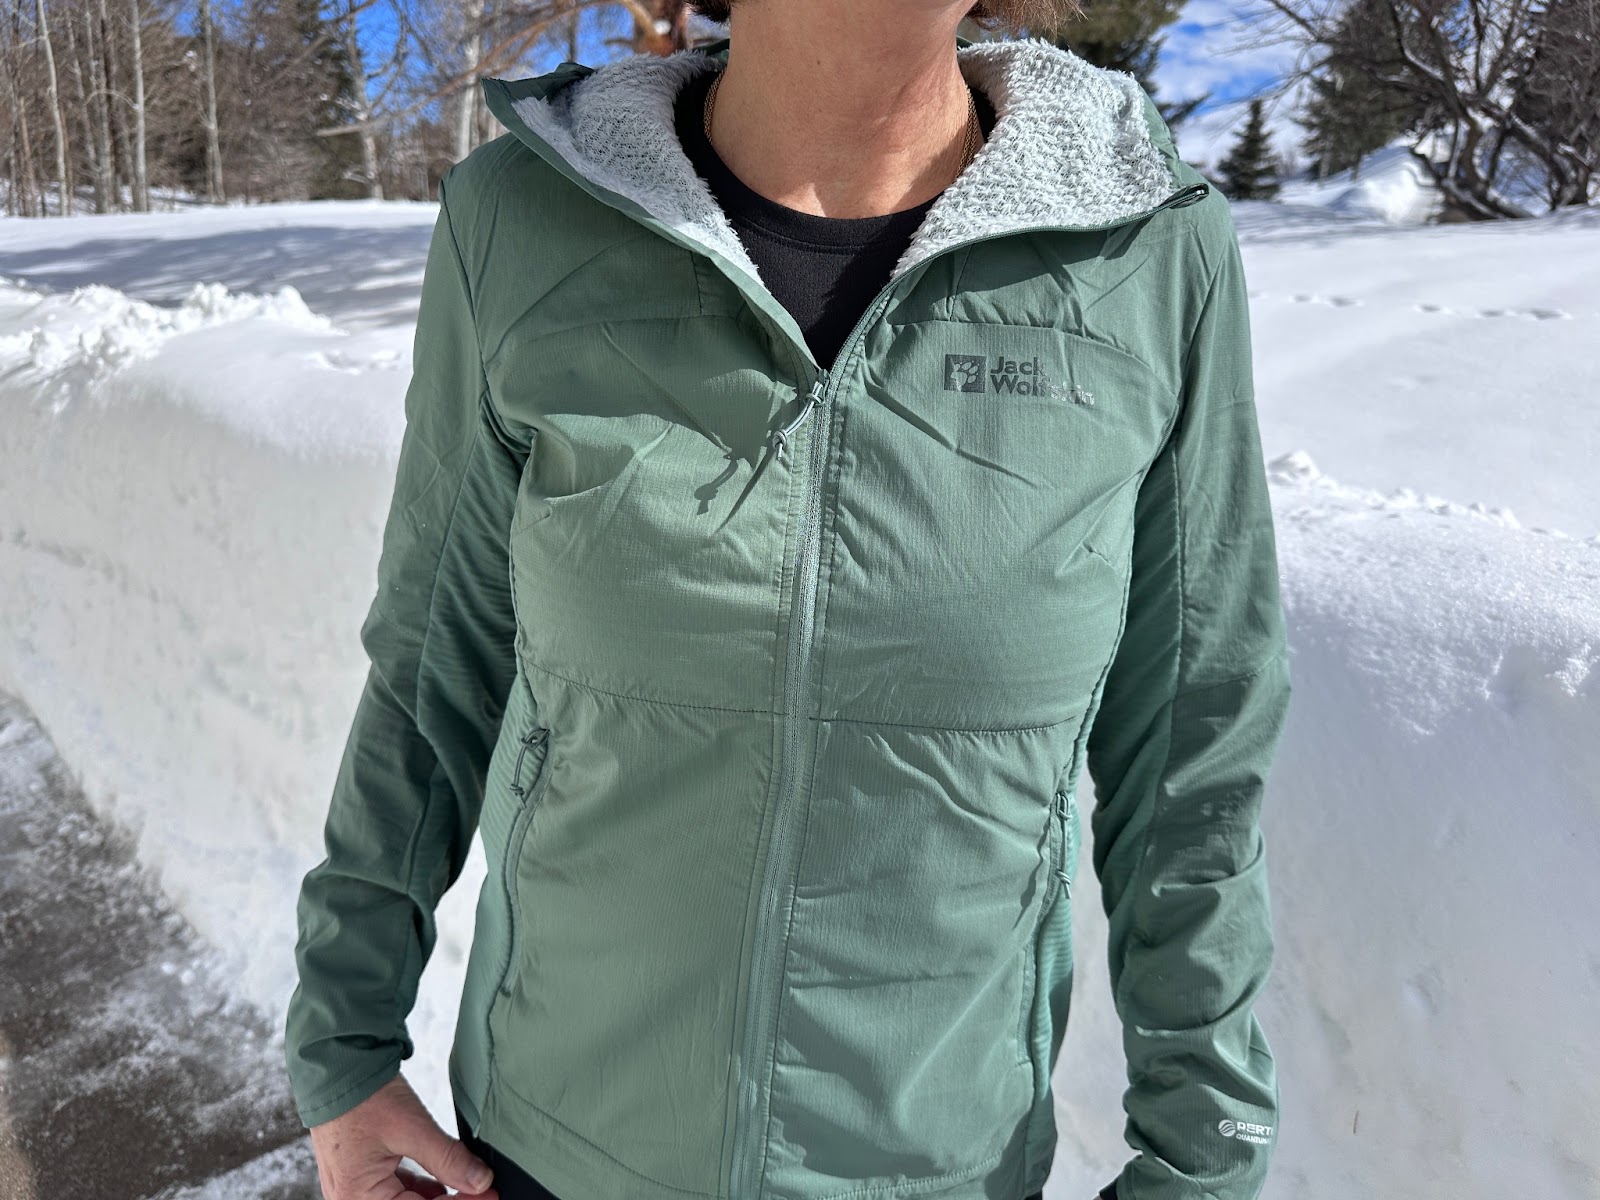 Road Trail Run: Jack Wolfskin Pre Light Alpha Jacket Women\'s and Men\'s  Jacket Reviews: Ultralight Insulation and Wind Protection